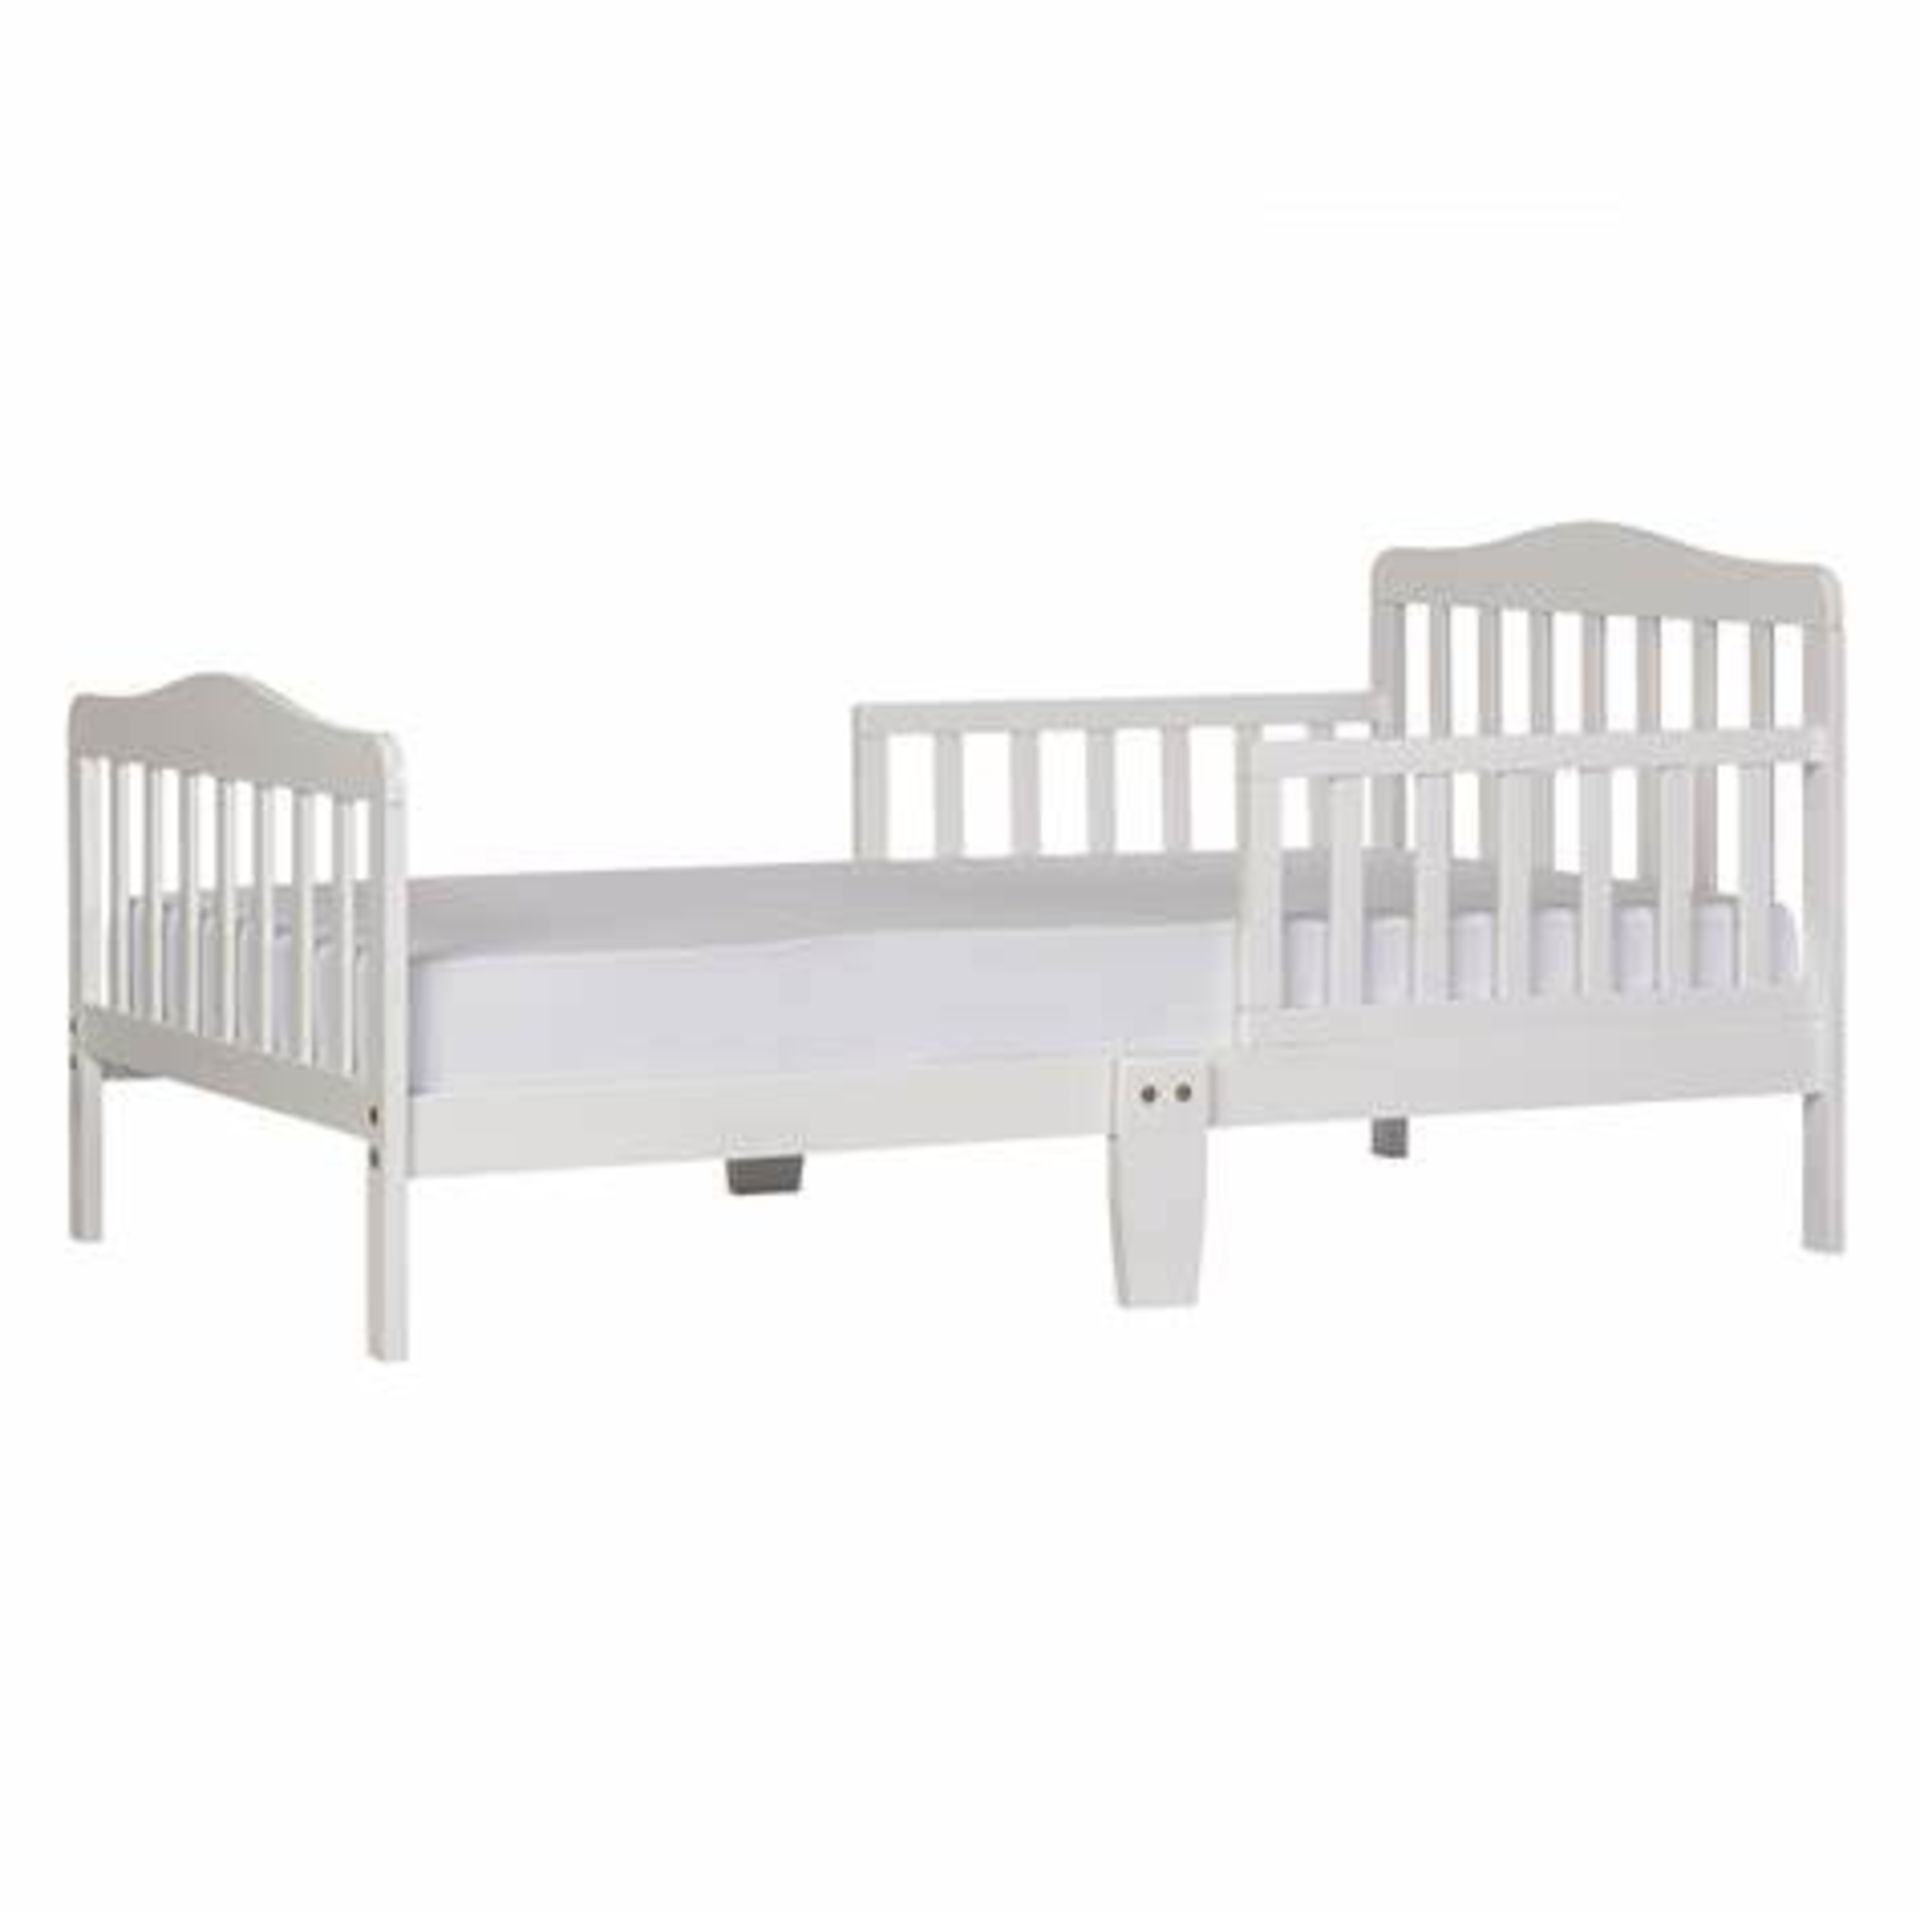 Brand New Dream on Me Classic Toddler Bed. Product dimensionS - 144.8L x 71.1W x 76.2H CM Comes with - Image 3 of 4